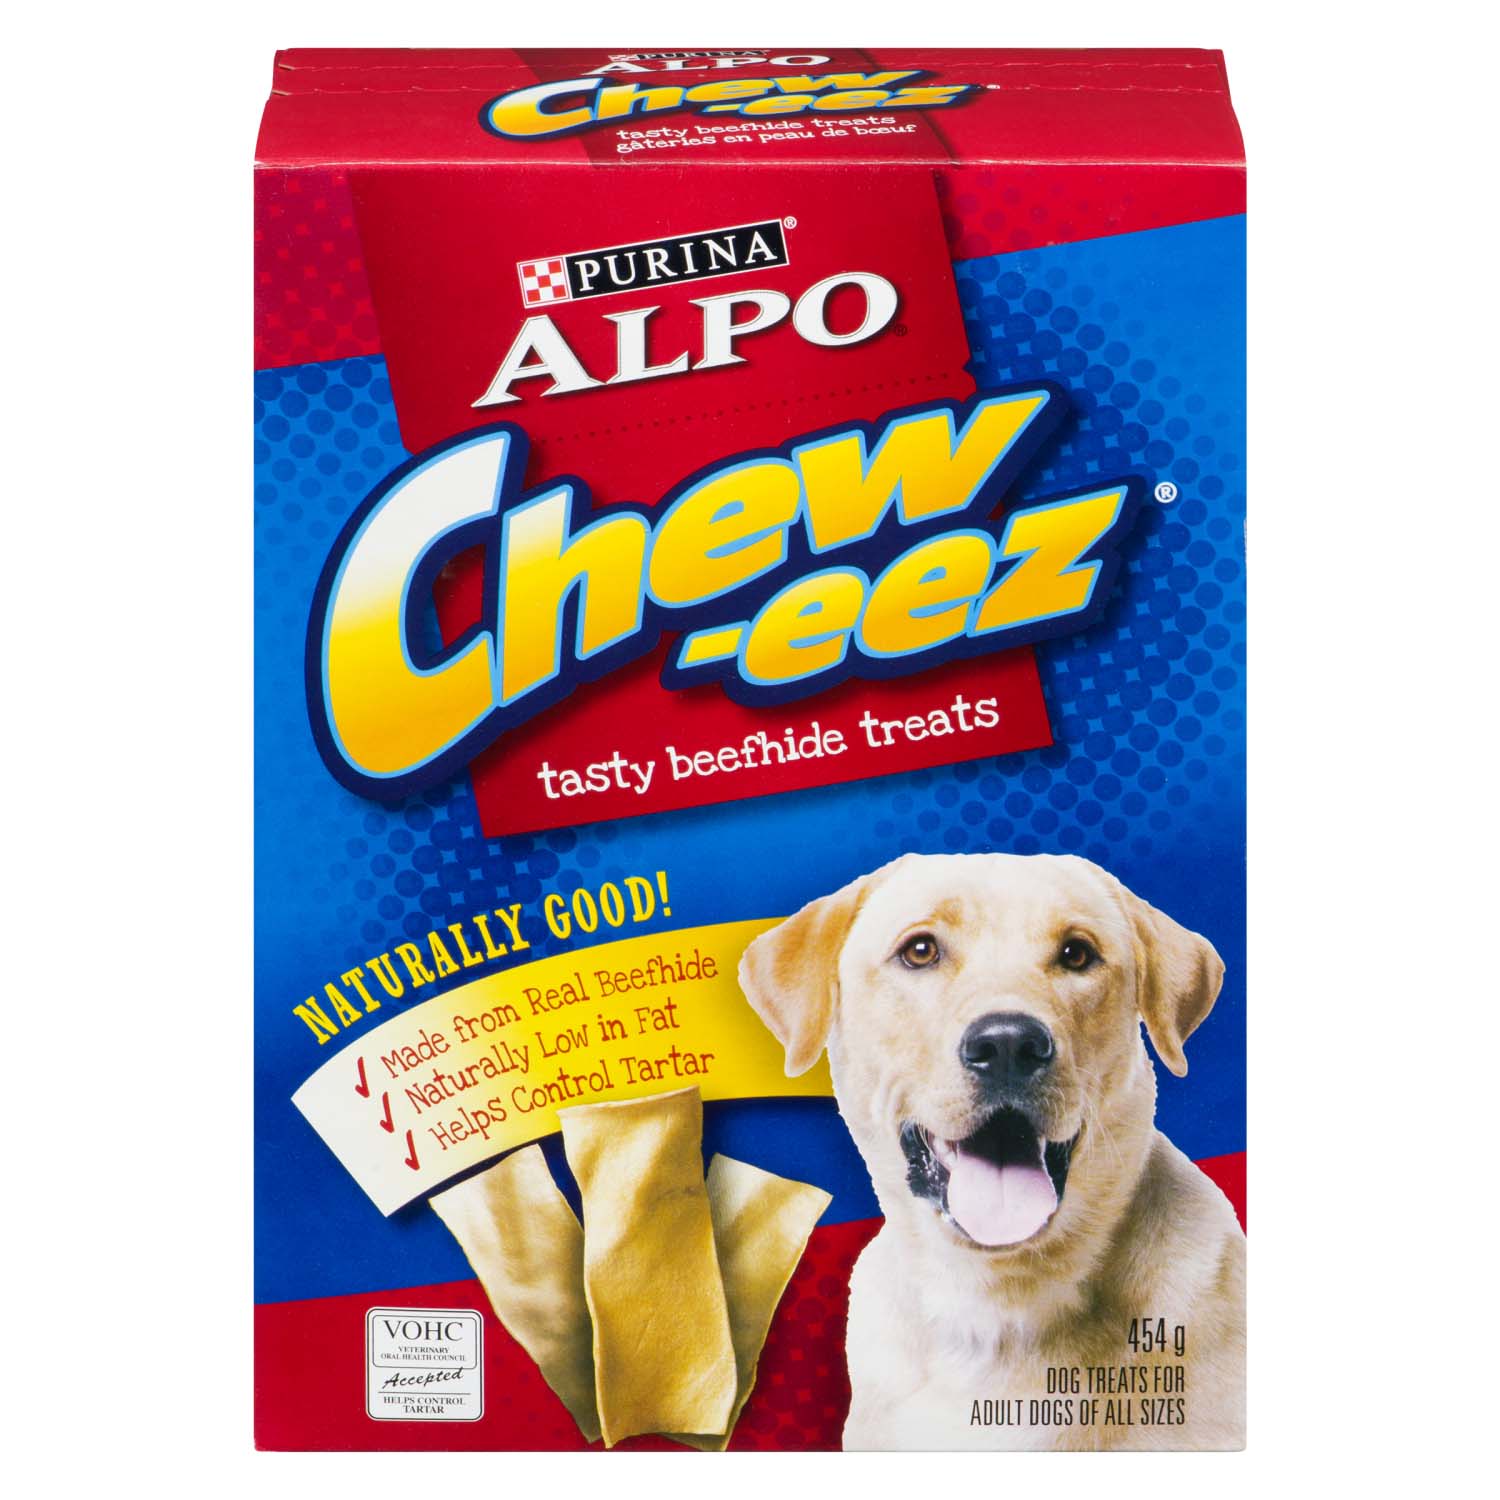 Alpo Chew-eez Dog Treats for Adult Dogs of All Sizes 454 g | Powell's Supermarkets